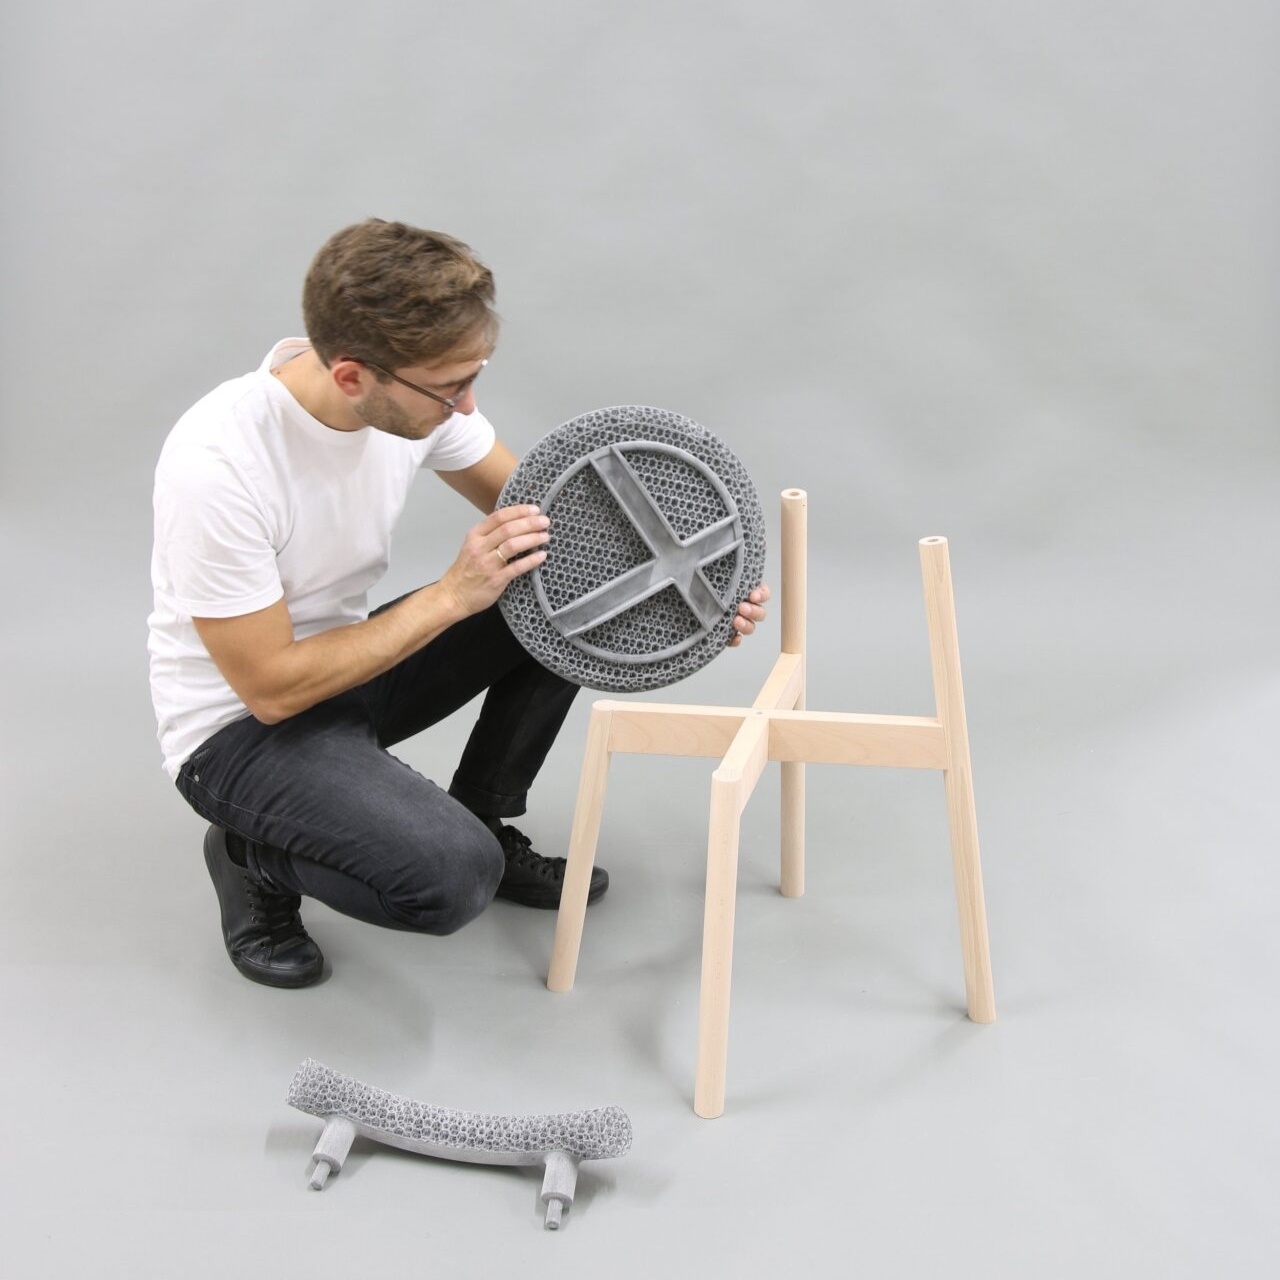 These 3D printed chairs bring an element of flexible, sustainable options to your living room